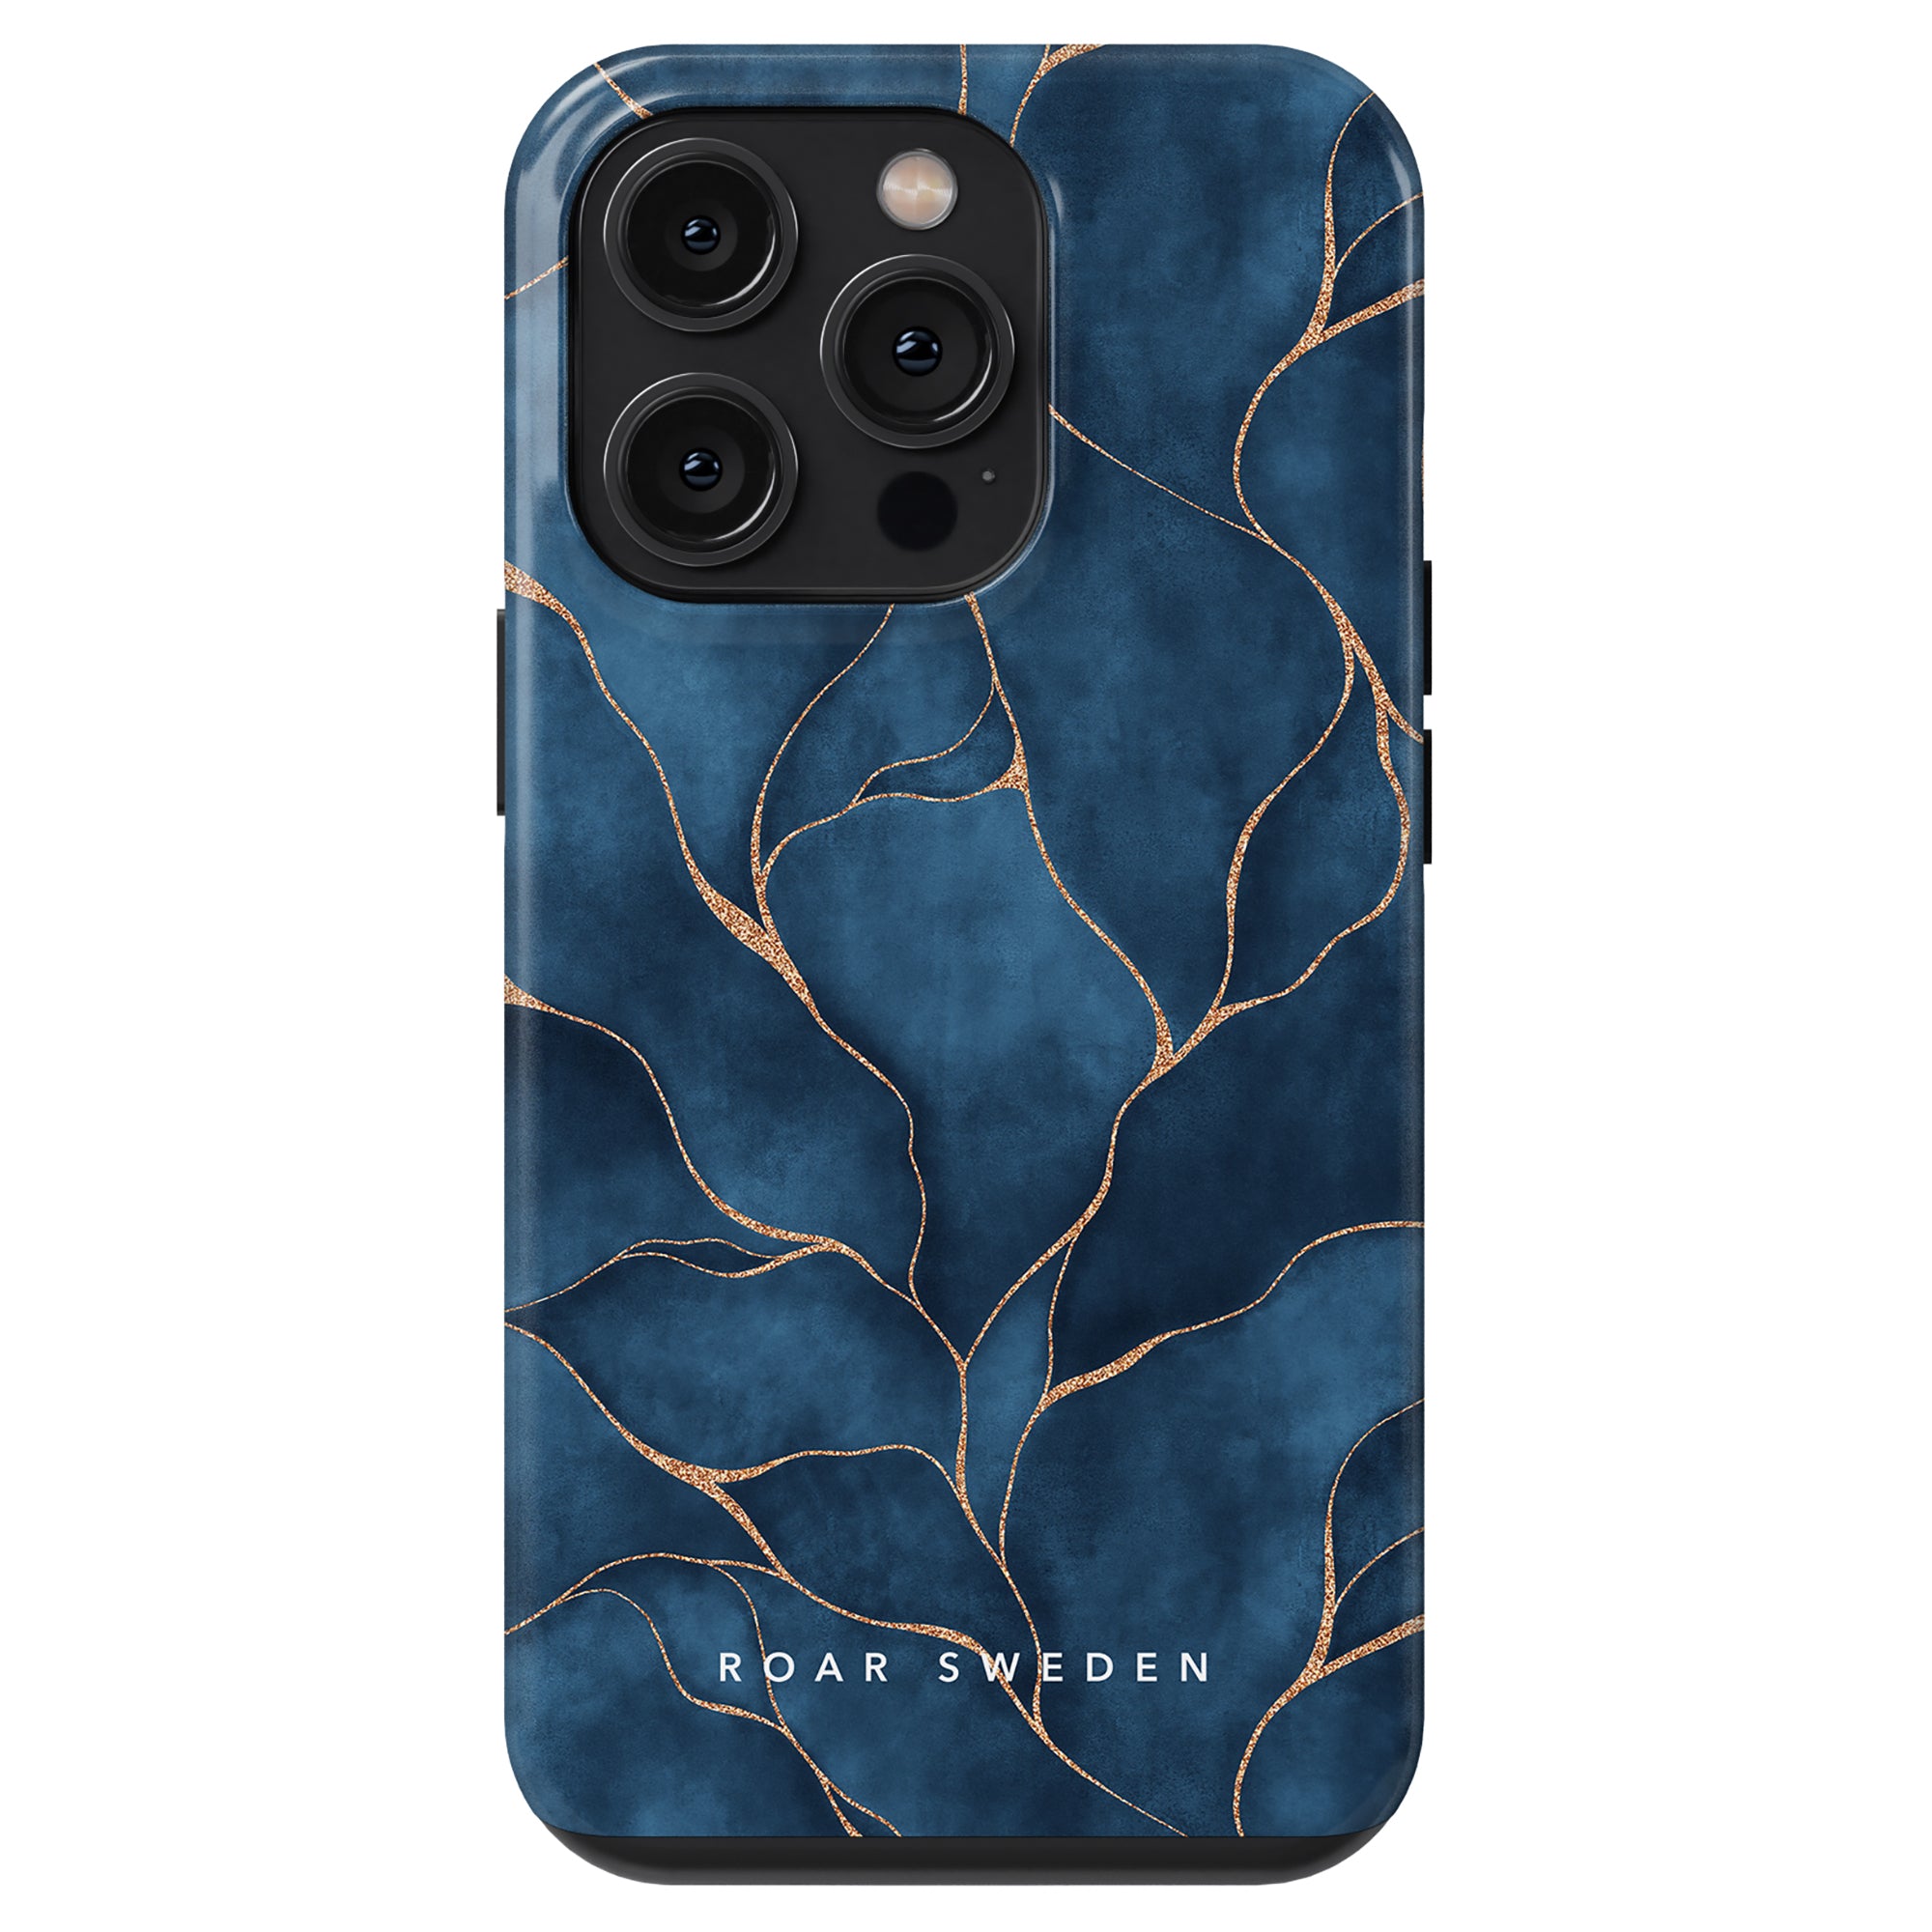 Blue Tough Case with gold line pattern, camera cutouts, and Yggdrasil branding.